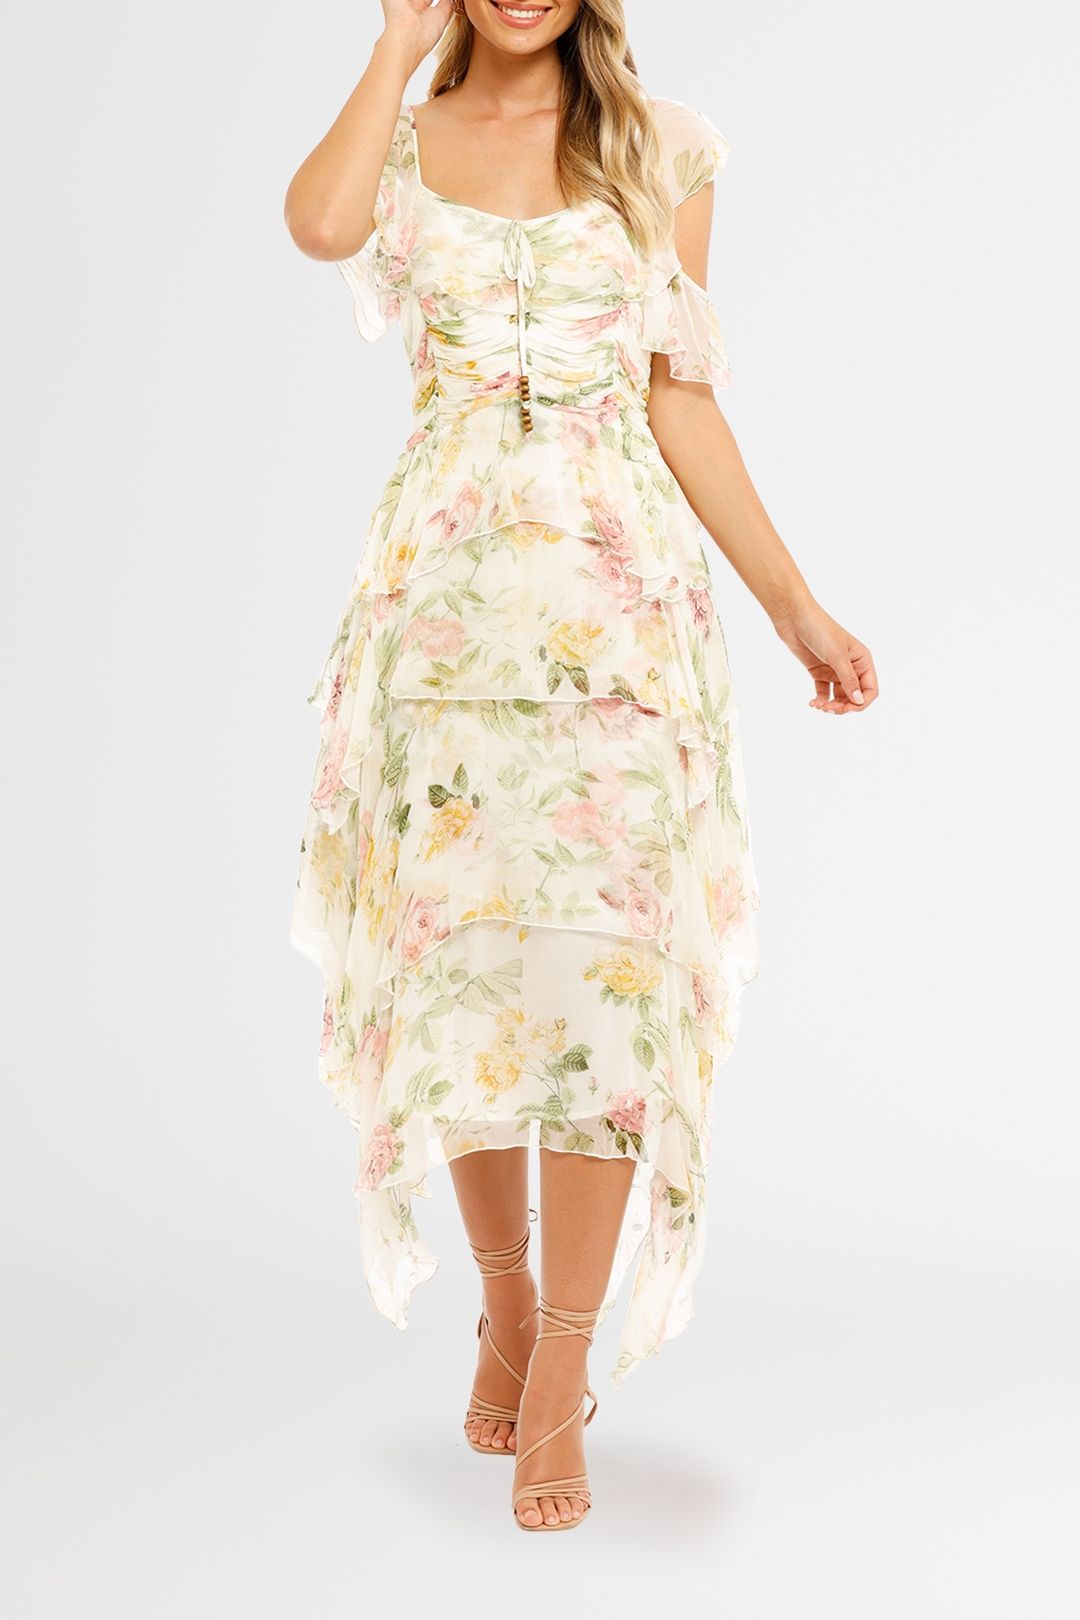 Ministry of Style Garden Party Ruffle Midi Dress floral